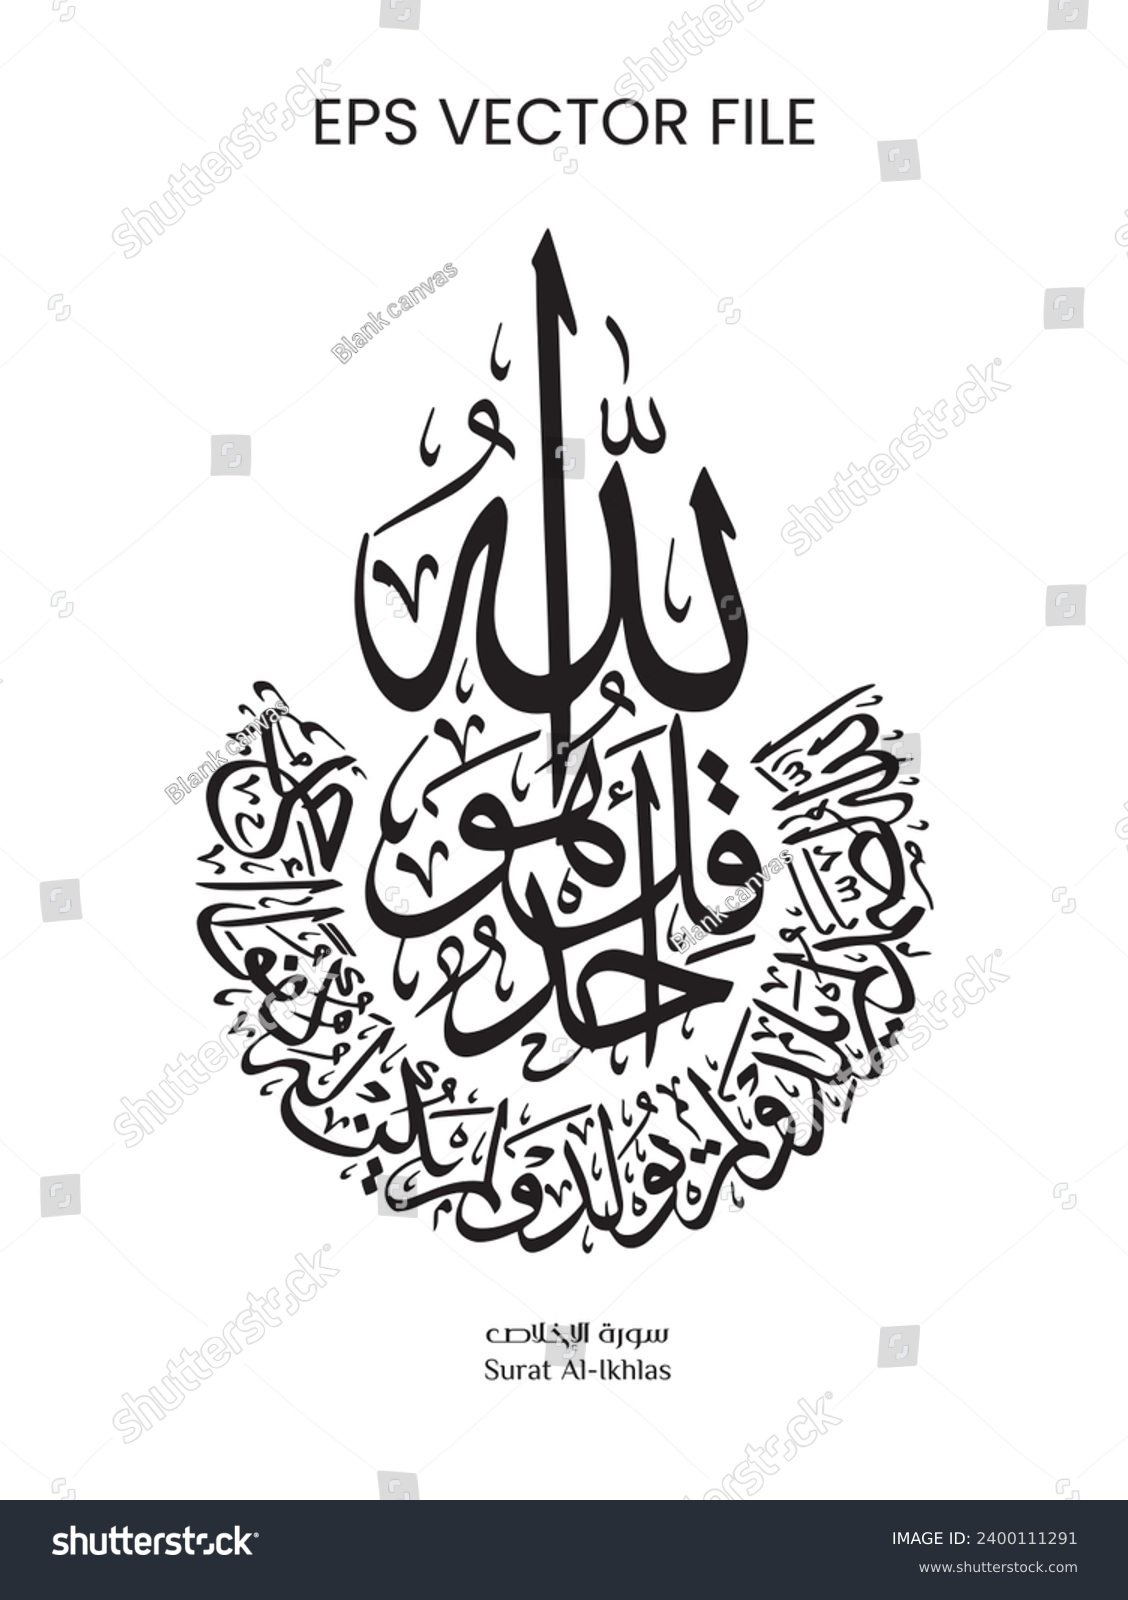 SVG of Arabic Calligraphy design of 